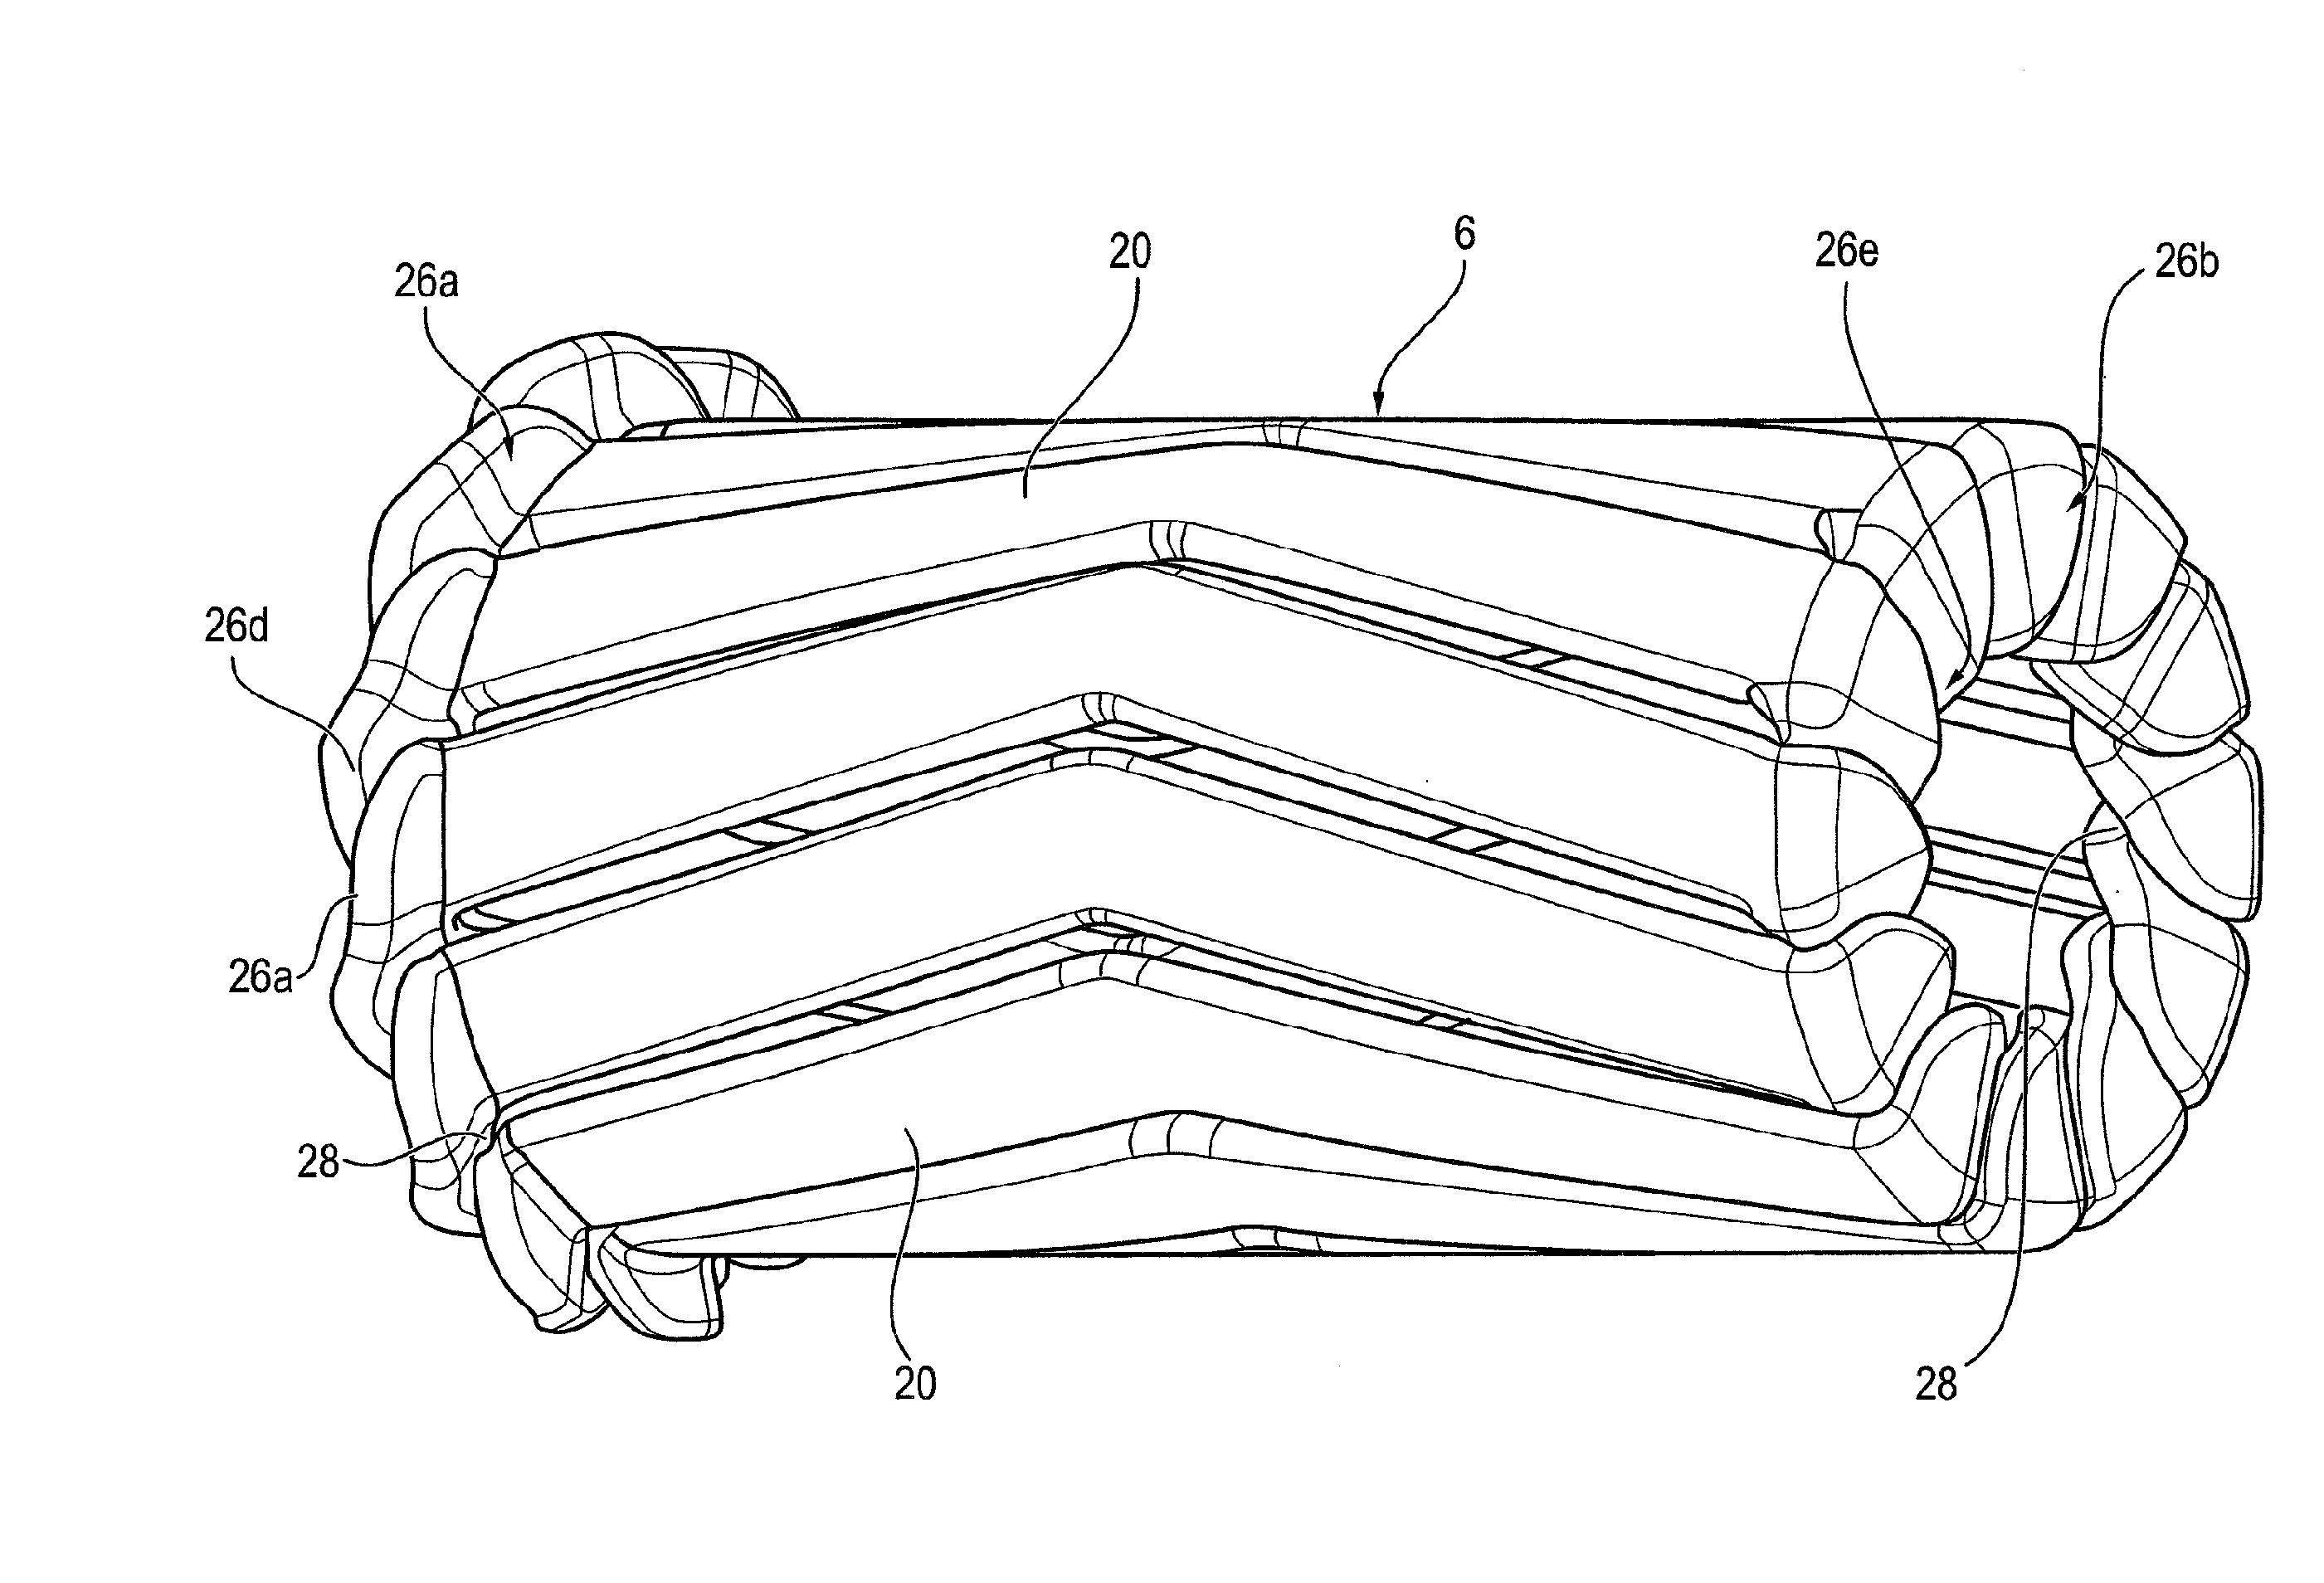 Preformed Coil to Produce a Self-Supporting Air Gap Winding, in Particular Oblique Winding of a Small Electrical Motor